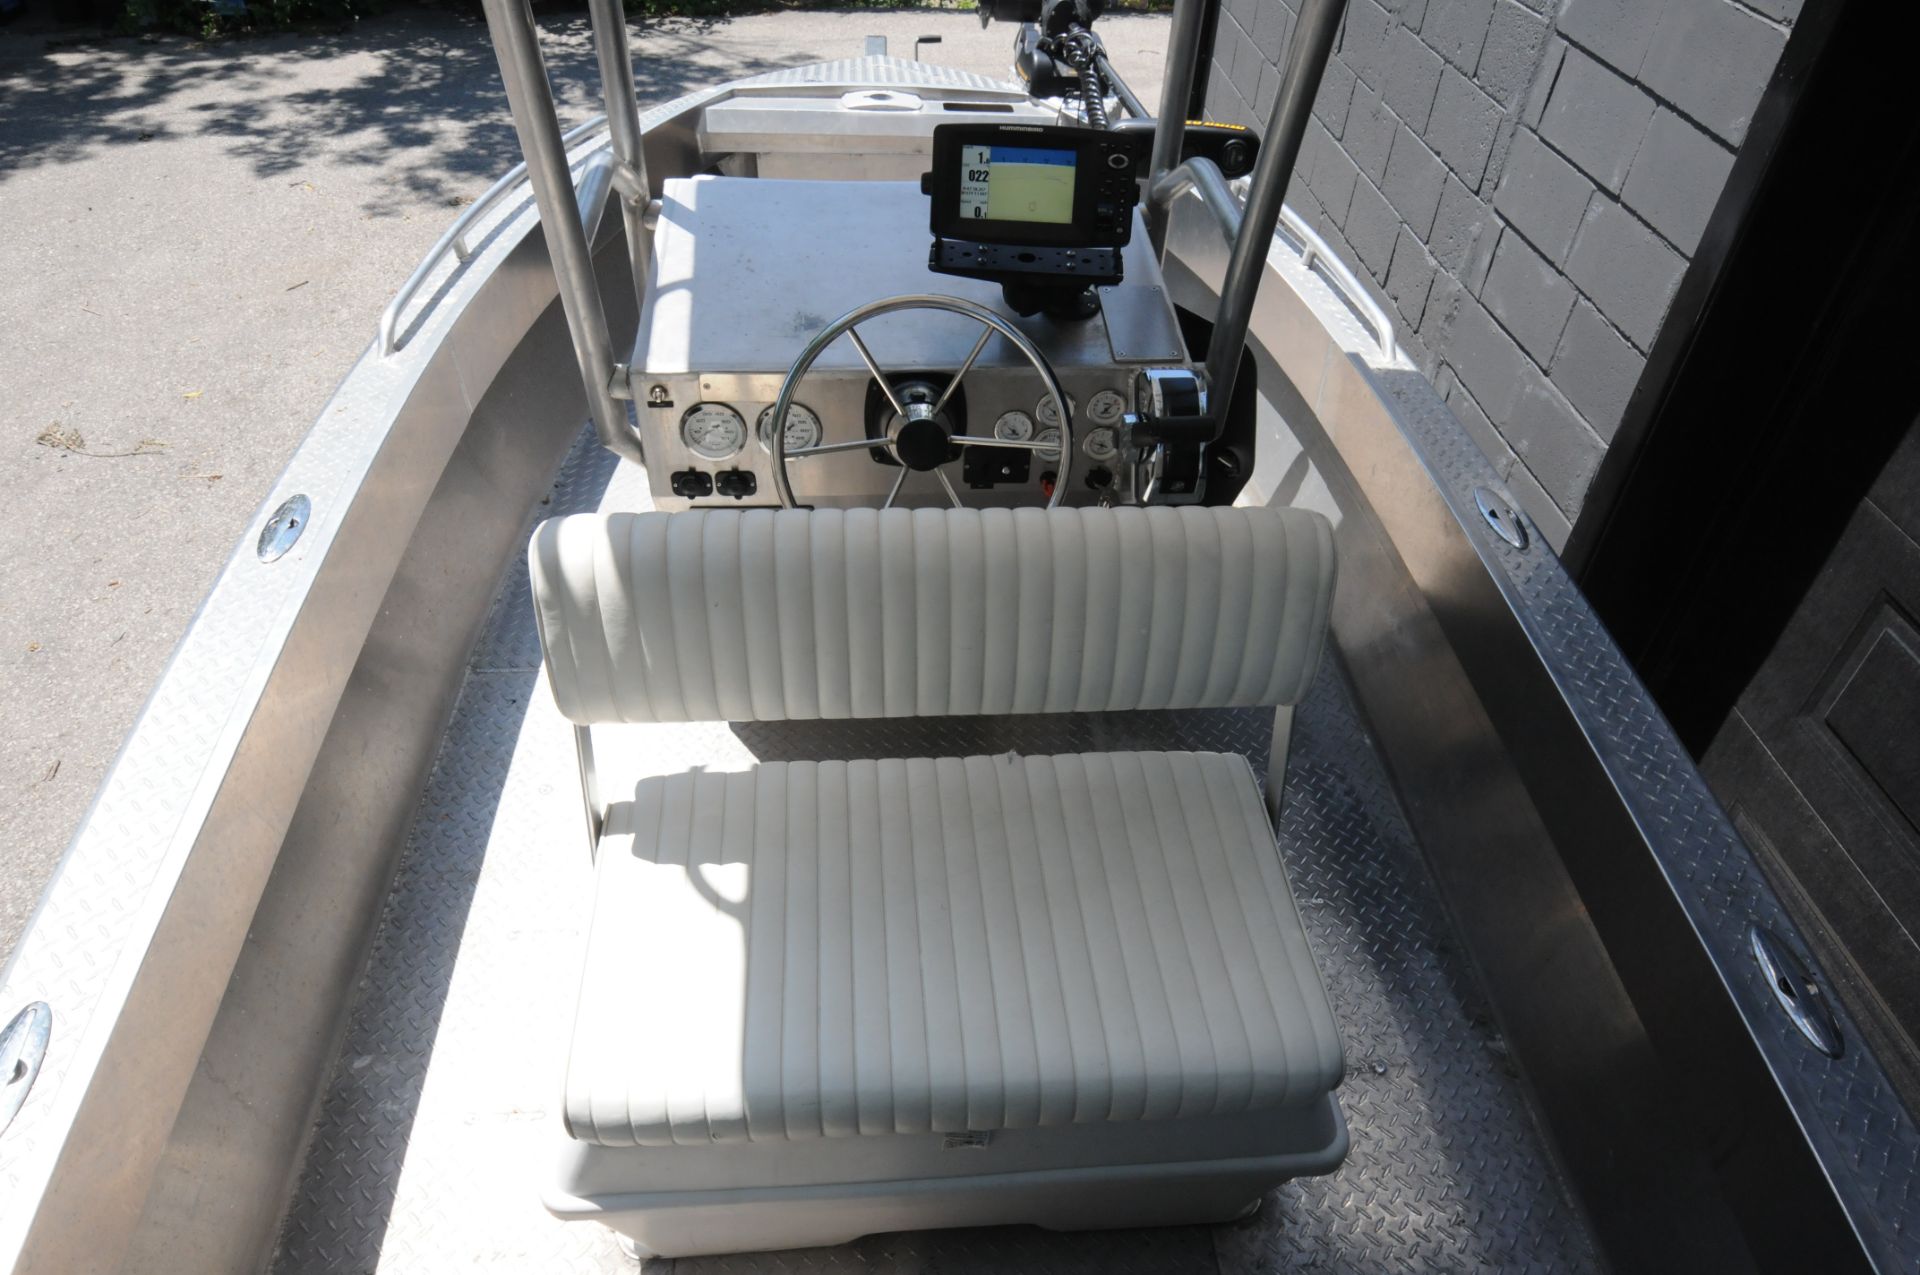 BAYVIEW BOATS (2013) PROFISHER 16 CENTER CONSOLE ALUMINUM FISHING BOAT ALL WELDED CONSTRUCTION - Bild 9 aus 21